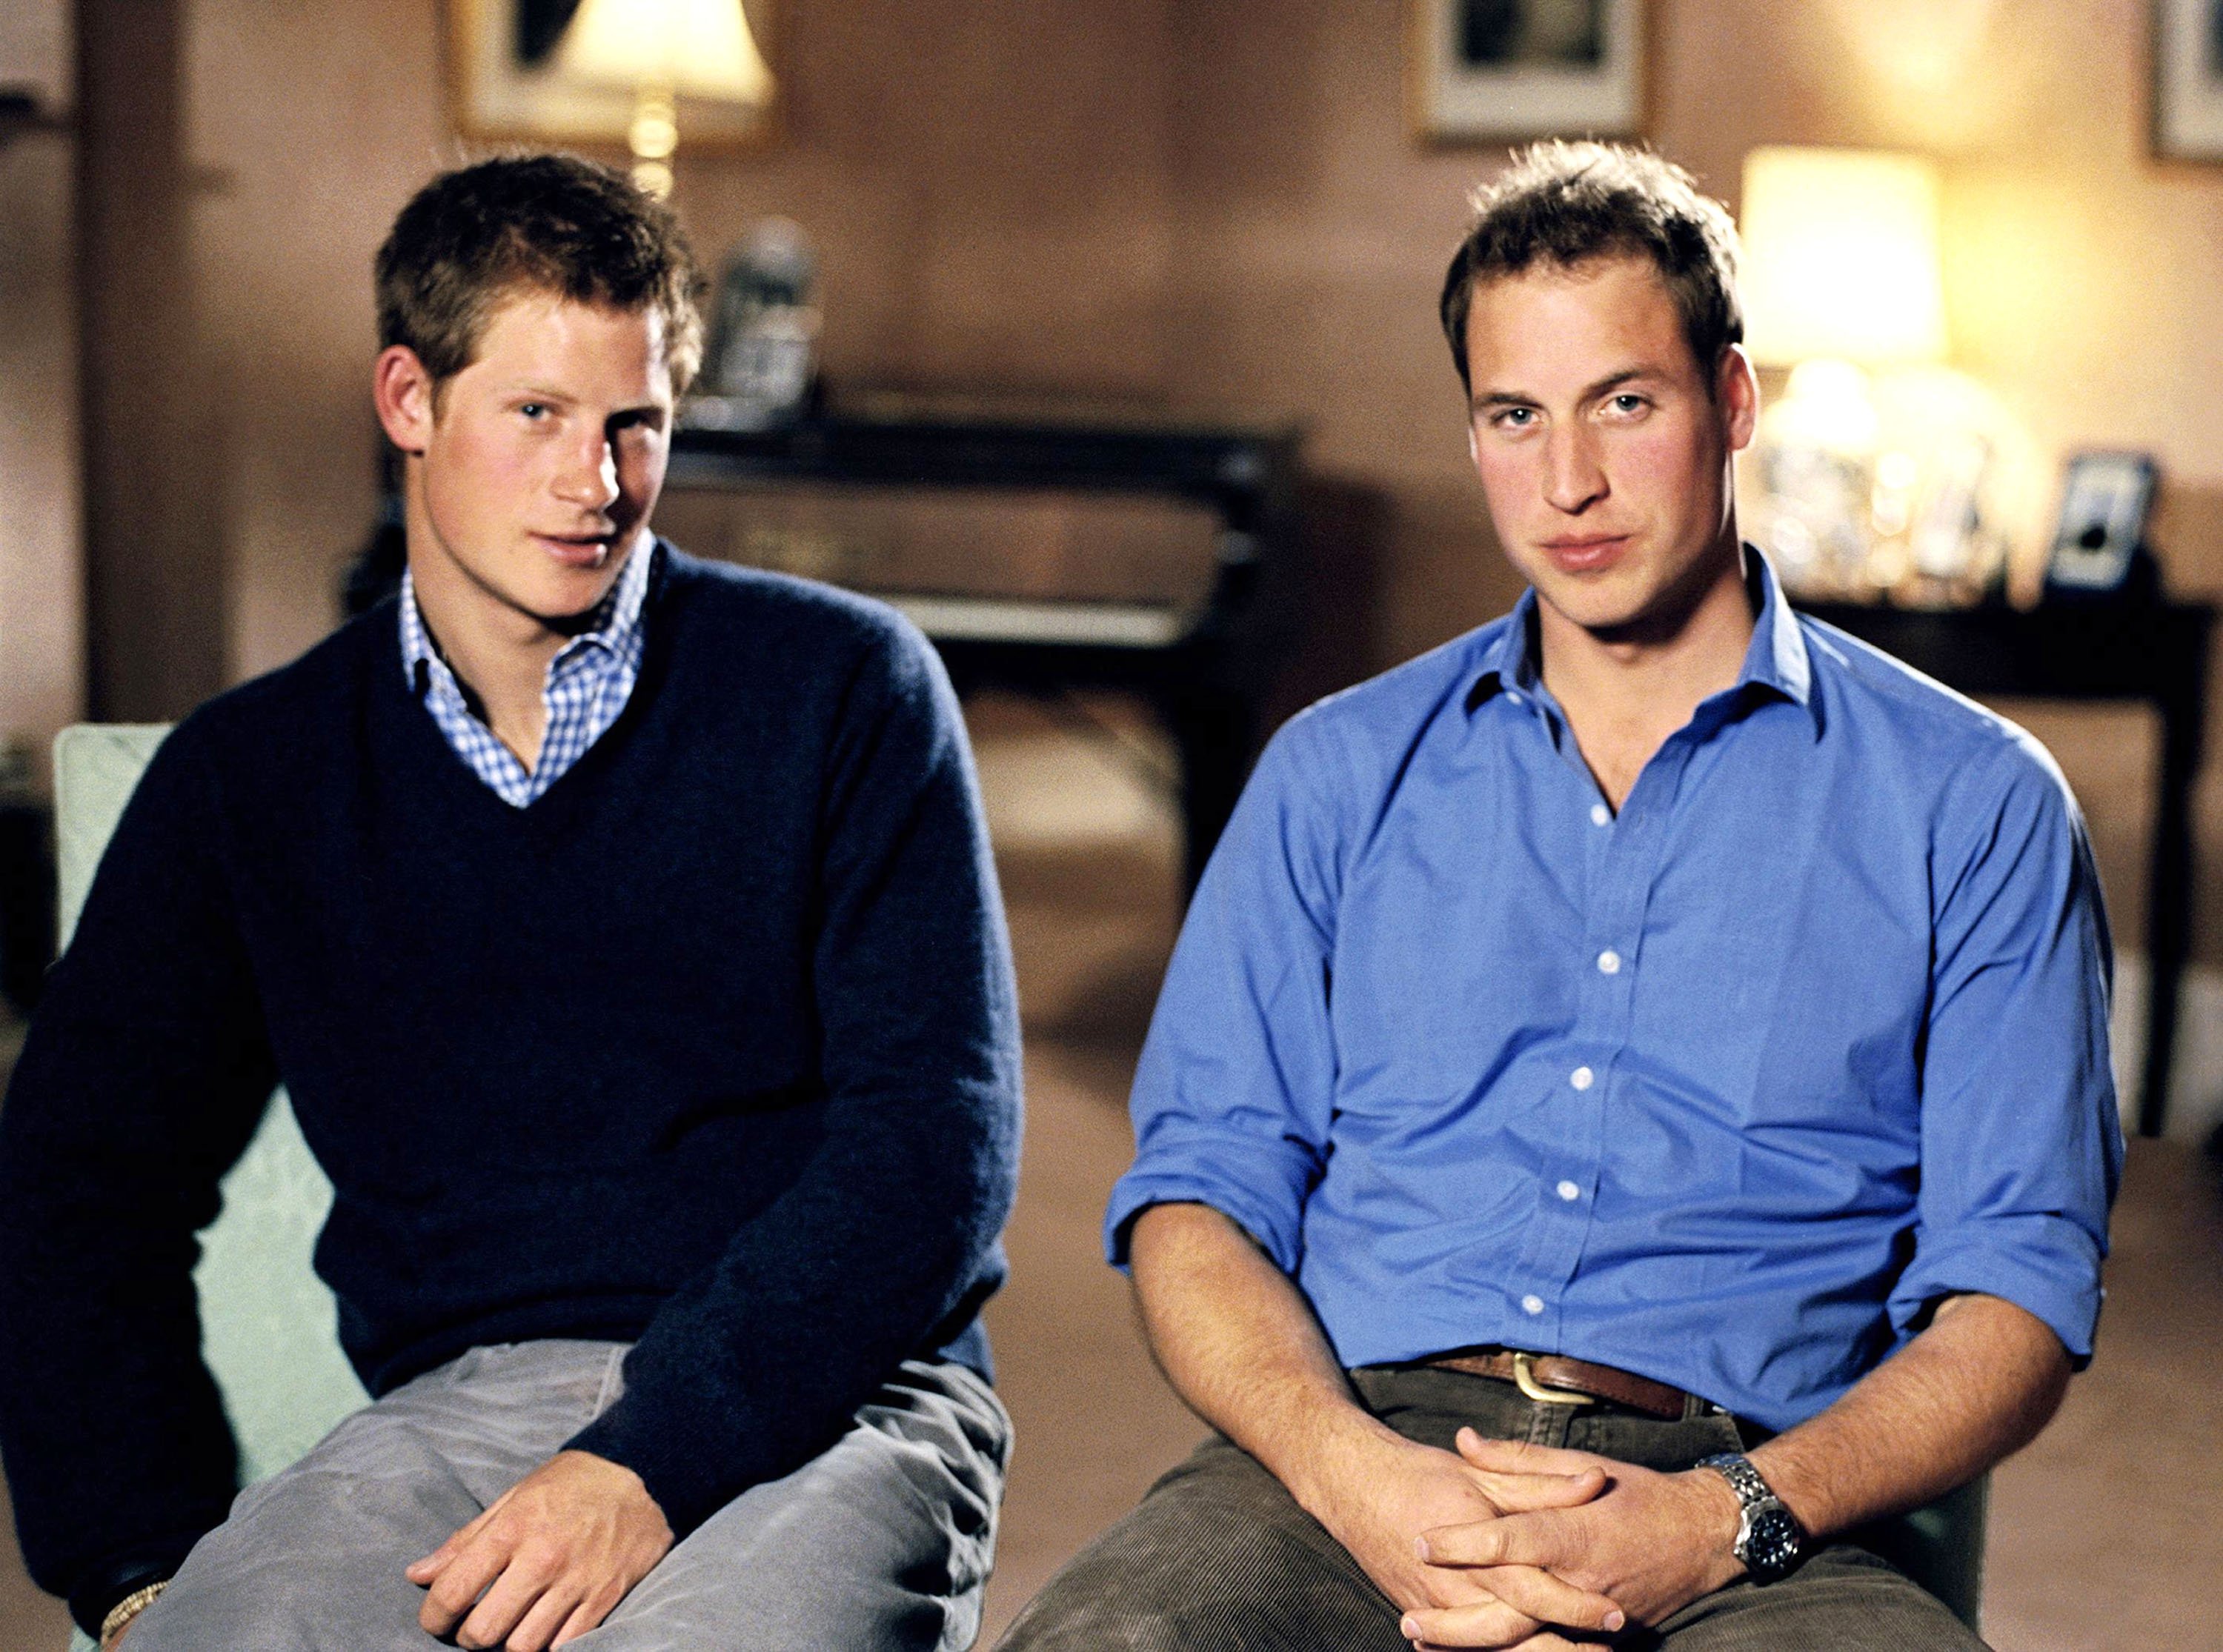 Prince Harry and Prince William, who tried to proect his broither from what was going on in their parents' relationship, speaking about a concert to mark the anniversary of Princess Diana's death